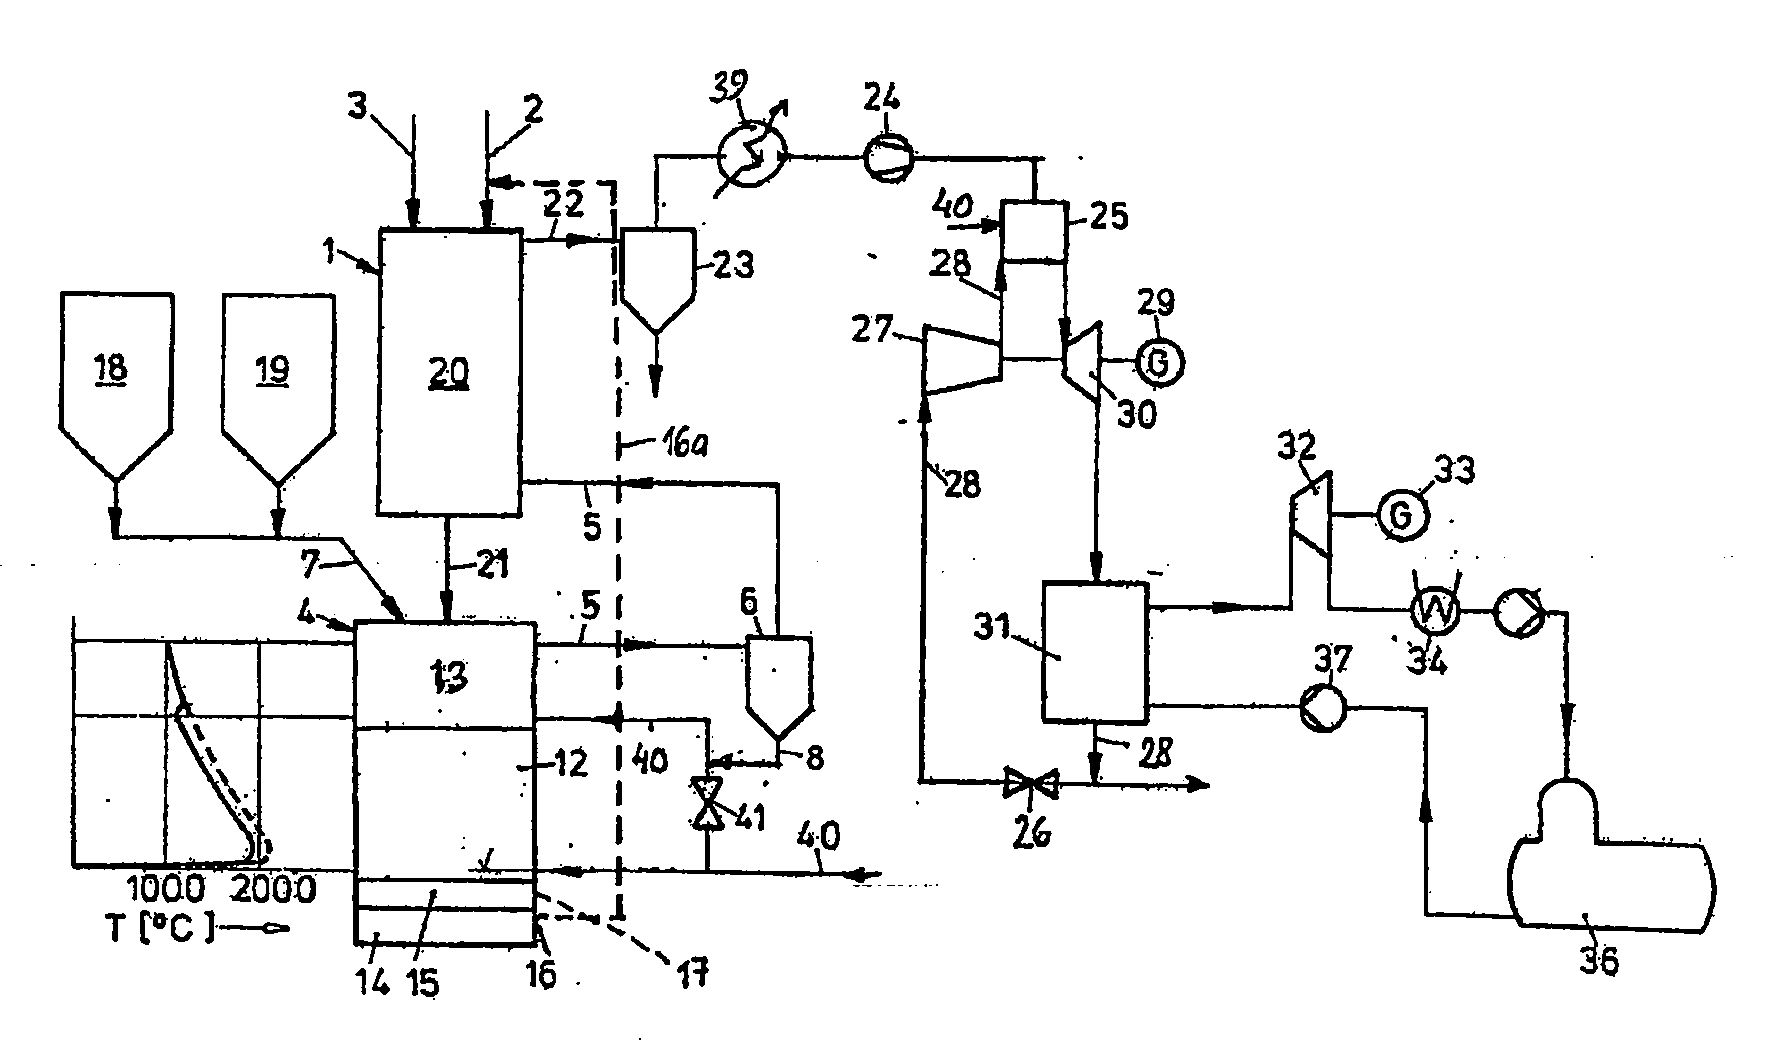 Process and installation for generating electrical energy in a gas and steam turbine (combined cycle) power generating plant